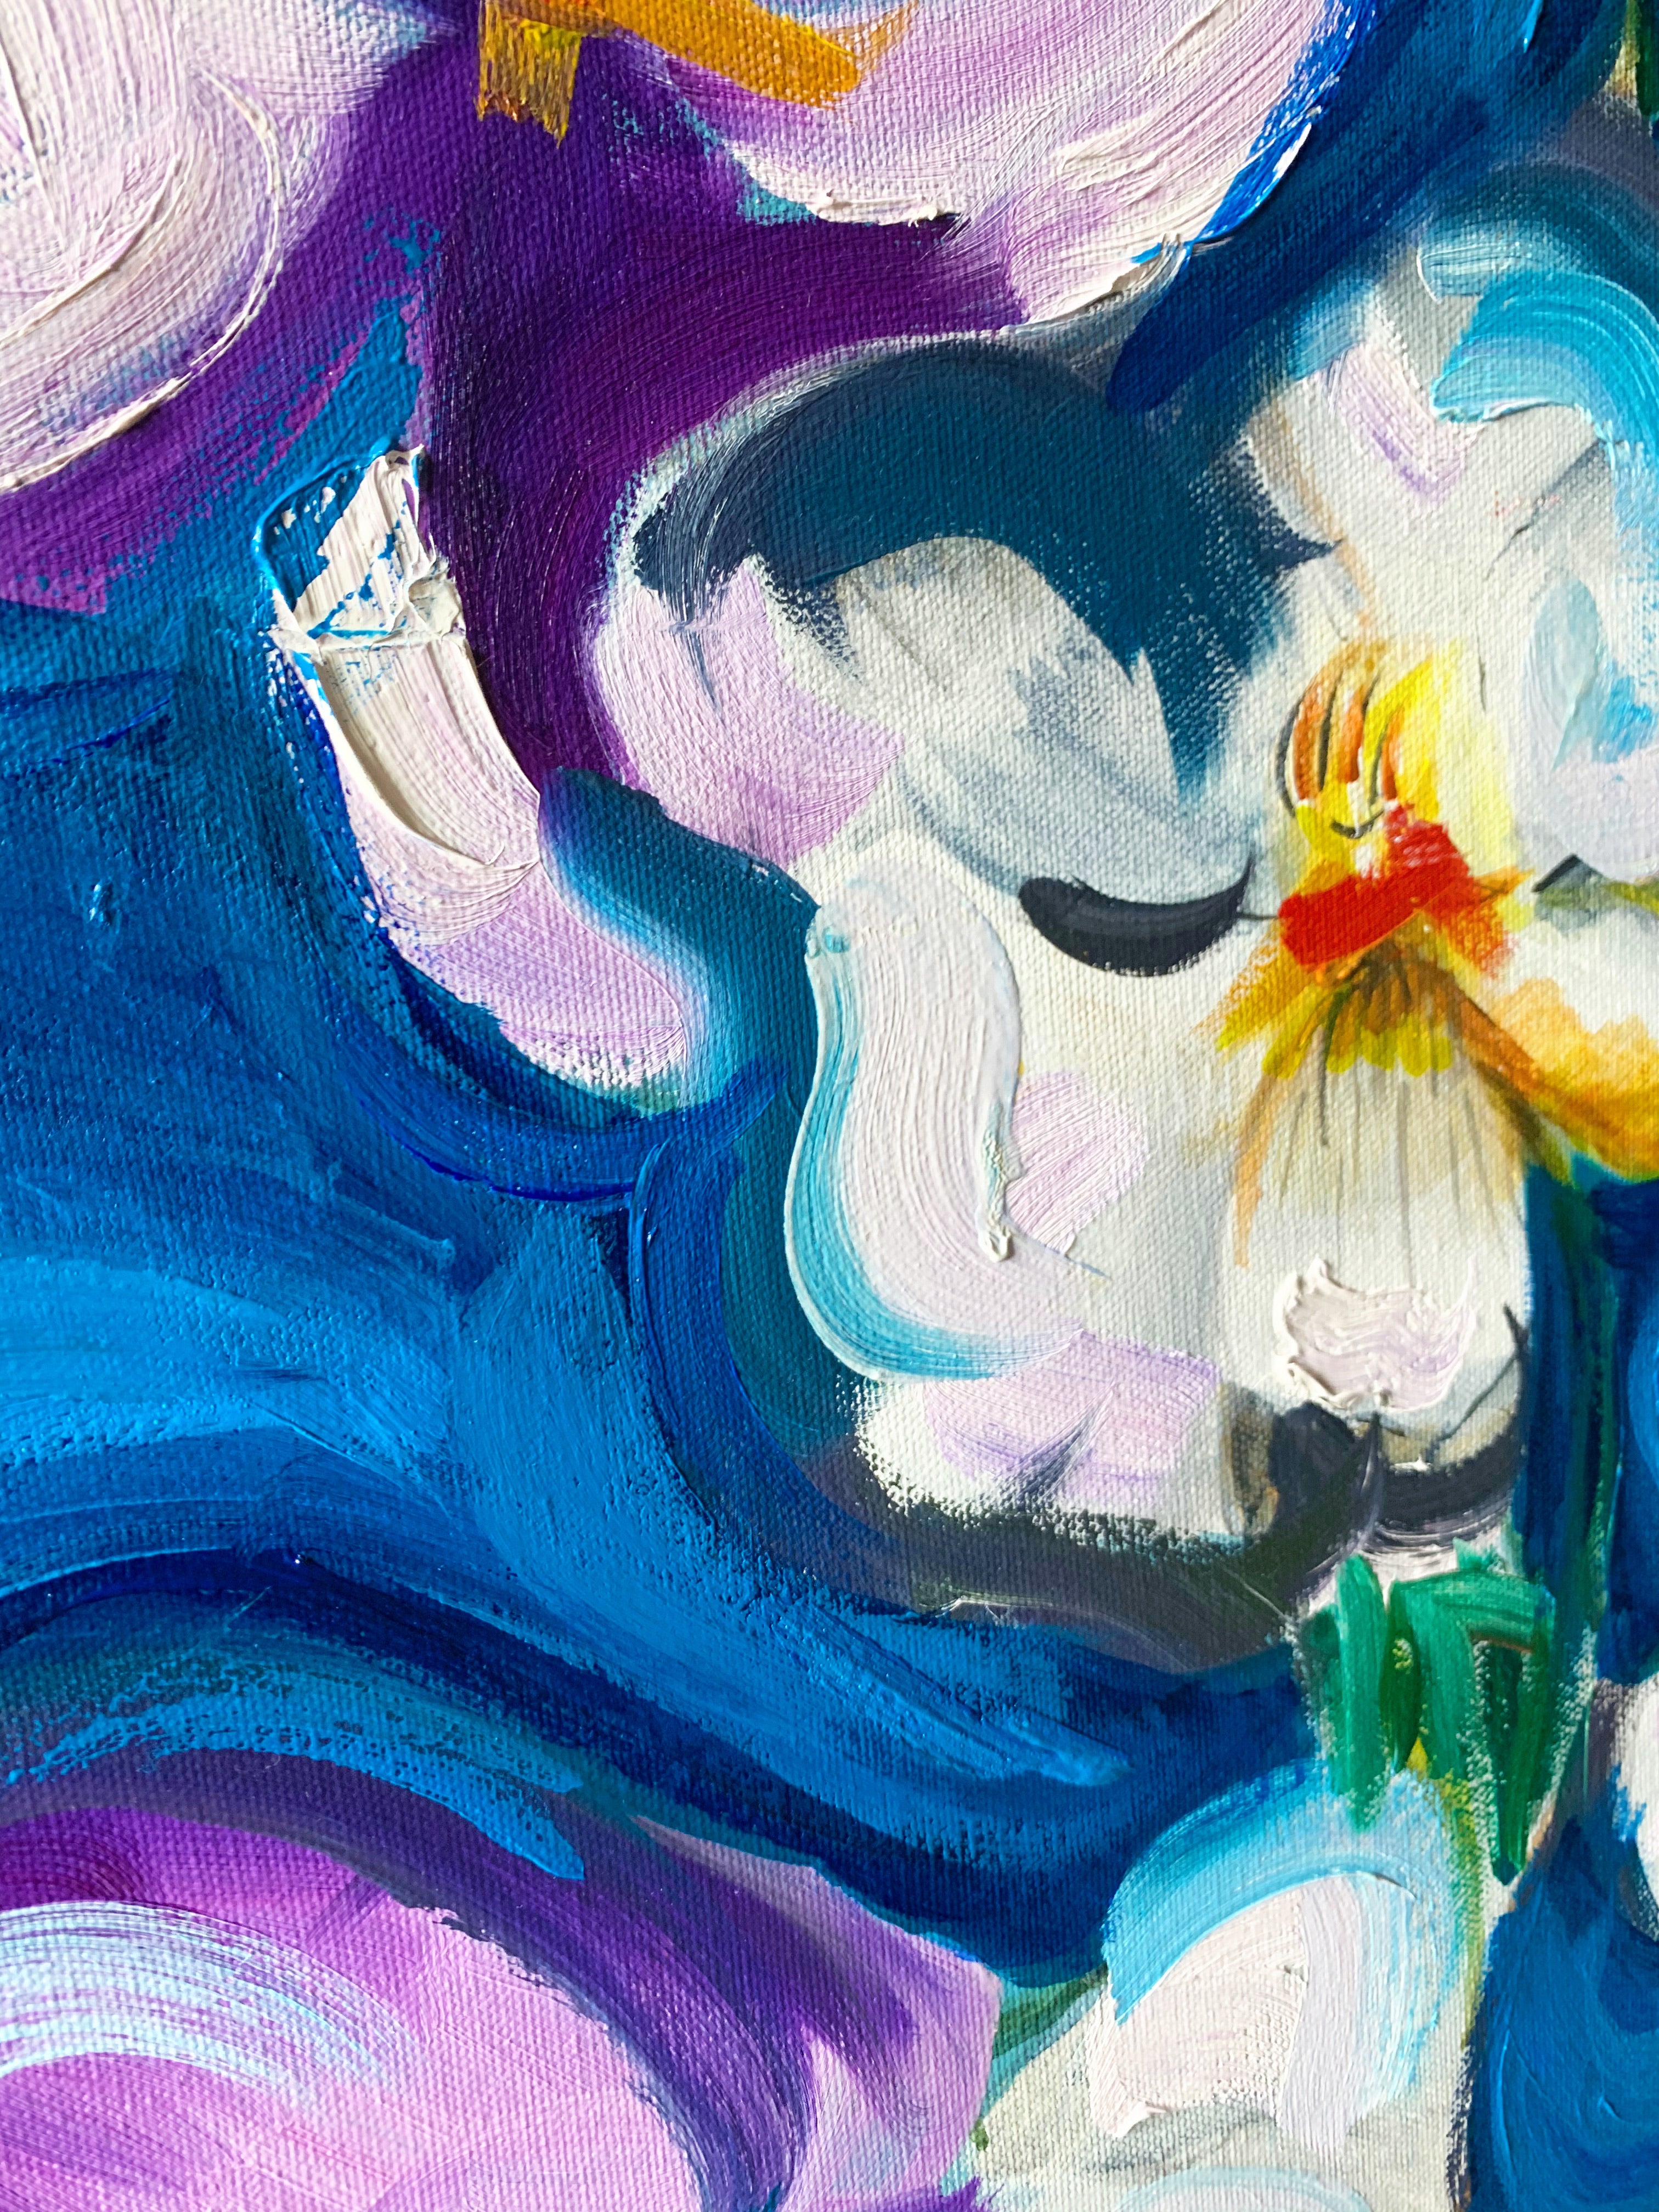 Orchids on Blue Oil Painting on Canvas.